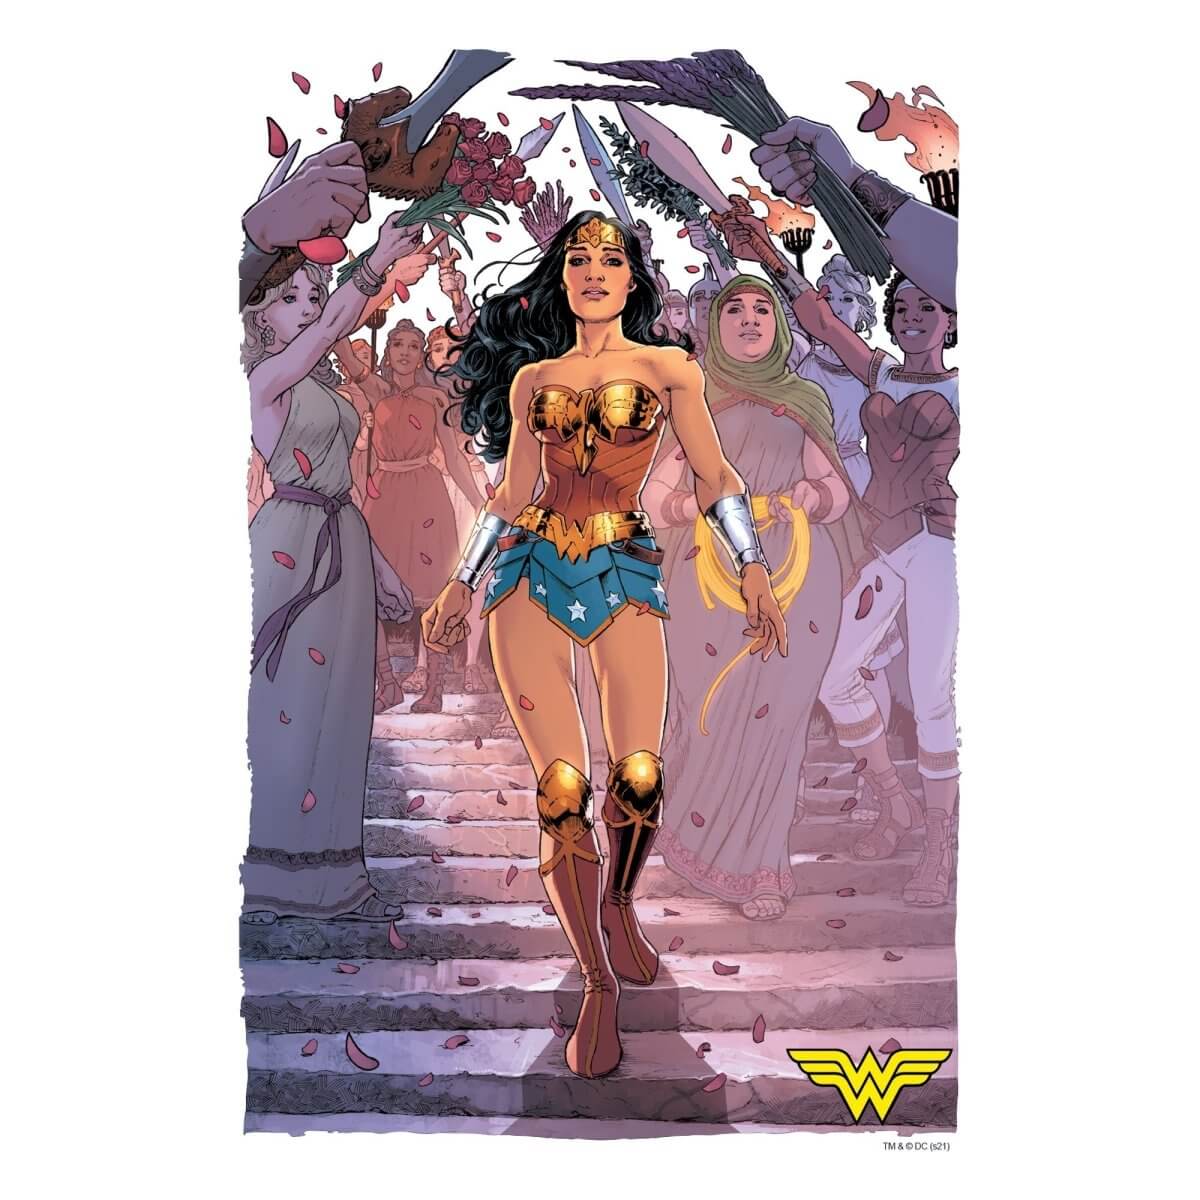 Kismet Decals Wonder Woman Rebirth #4 Pg18 Comic Cover Series Officially Licensed Wall Sticker - Easy DIY DC Comics Home, Kids or Adult Bedroom, Office, Living Room Decor Wall Art - Kismet Decals